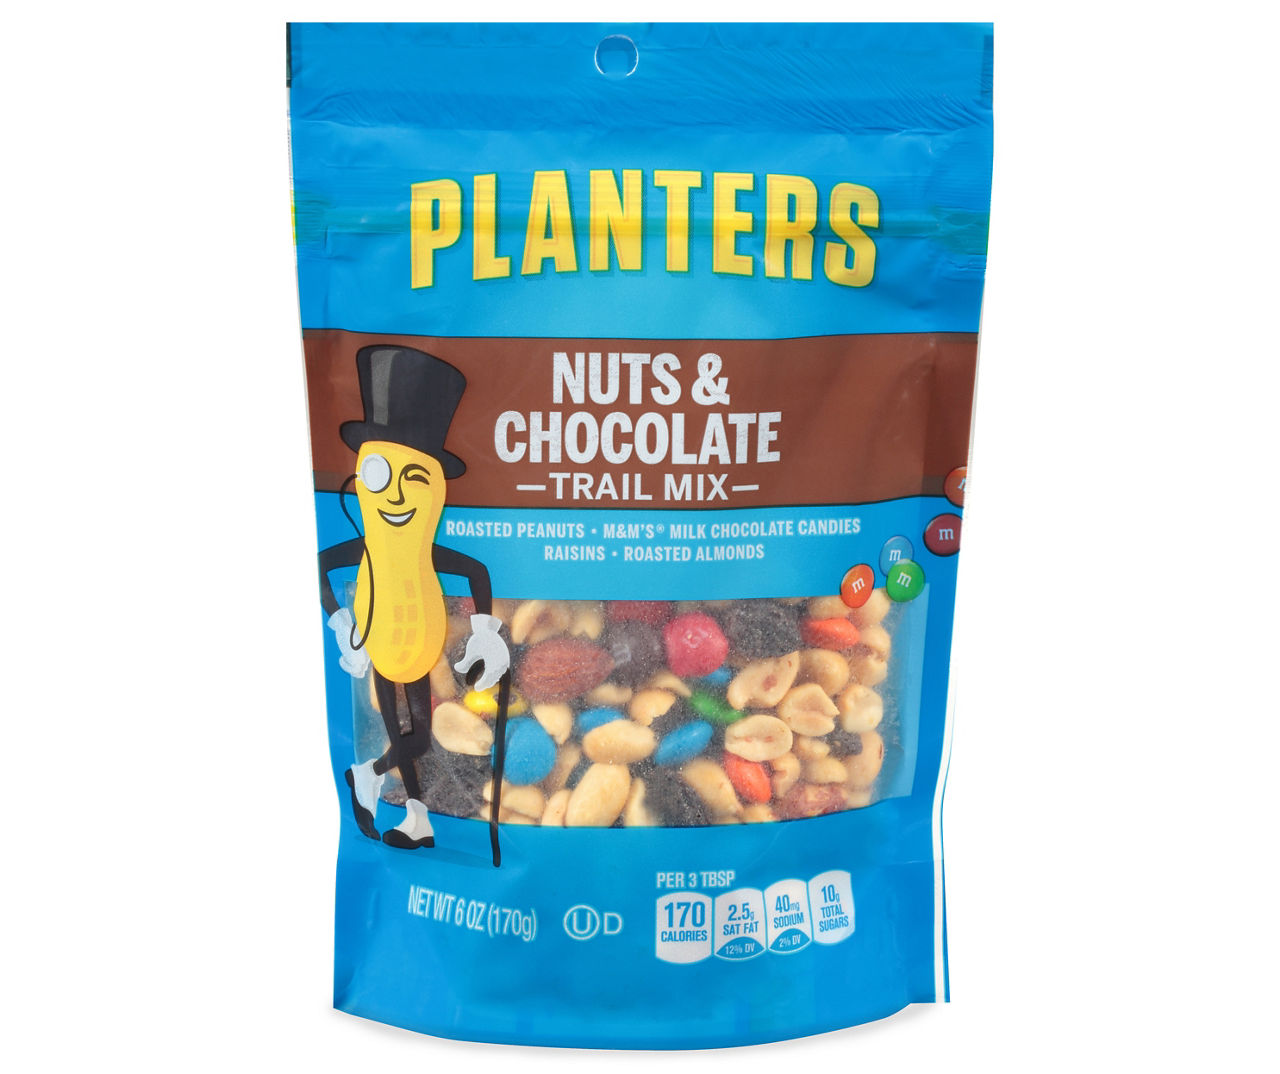 Planters Nuts & Chocolate Trail Mix with Roasted Peanuts, M&M Chocolate  Candies, Raisins & Roasted Almonds Reviews 2023